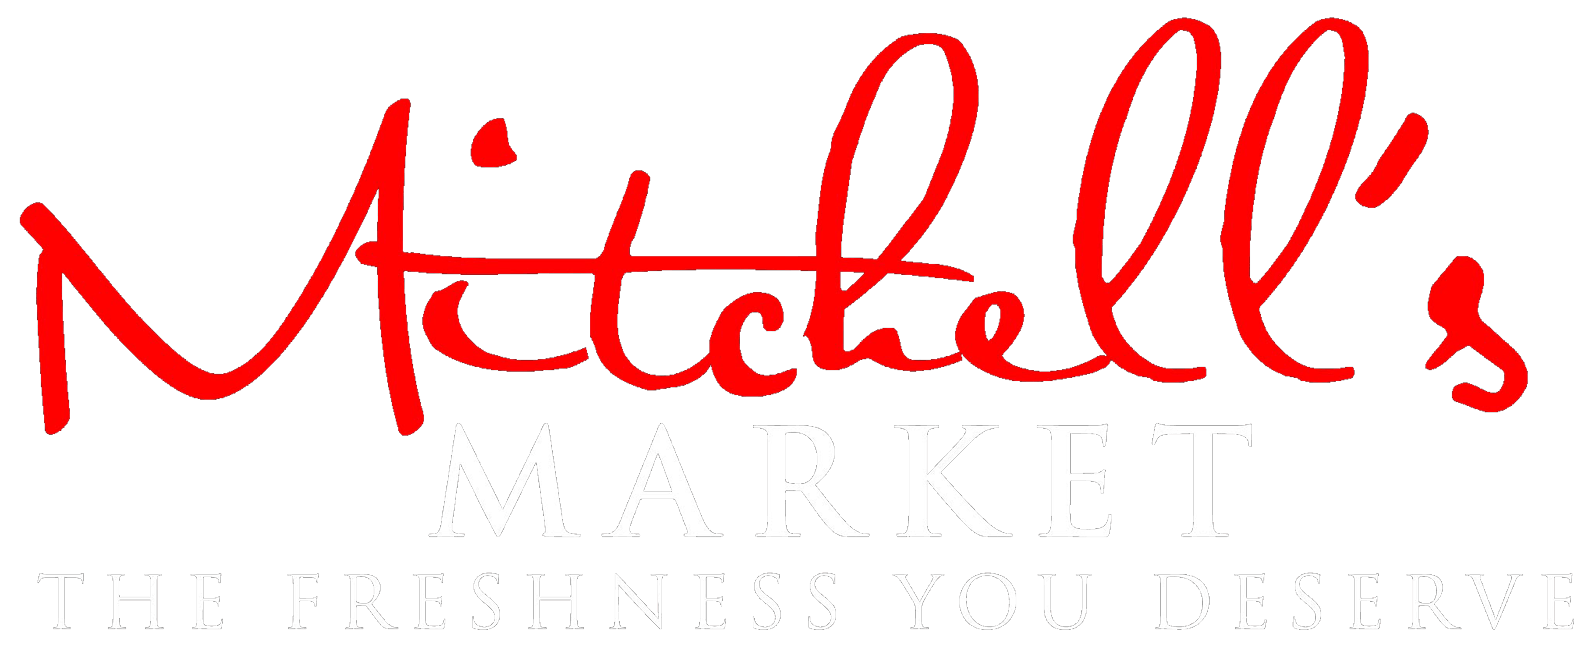 a red and white logo for mitchell's market.